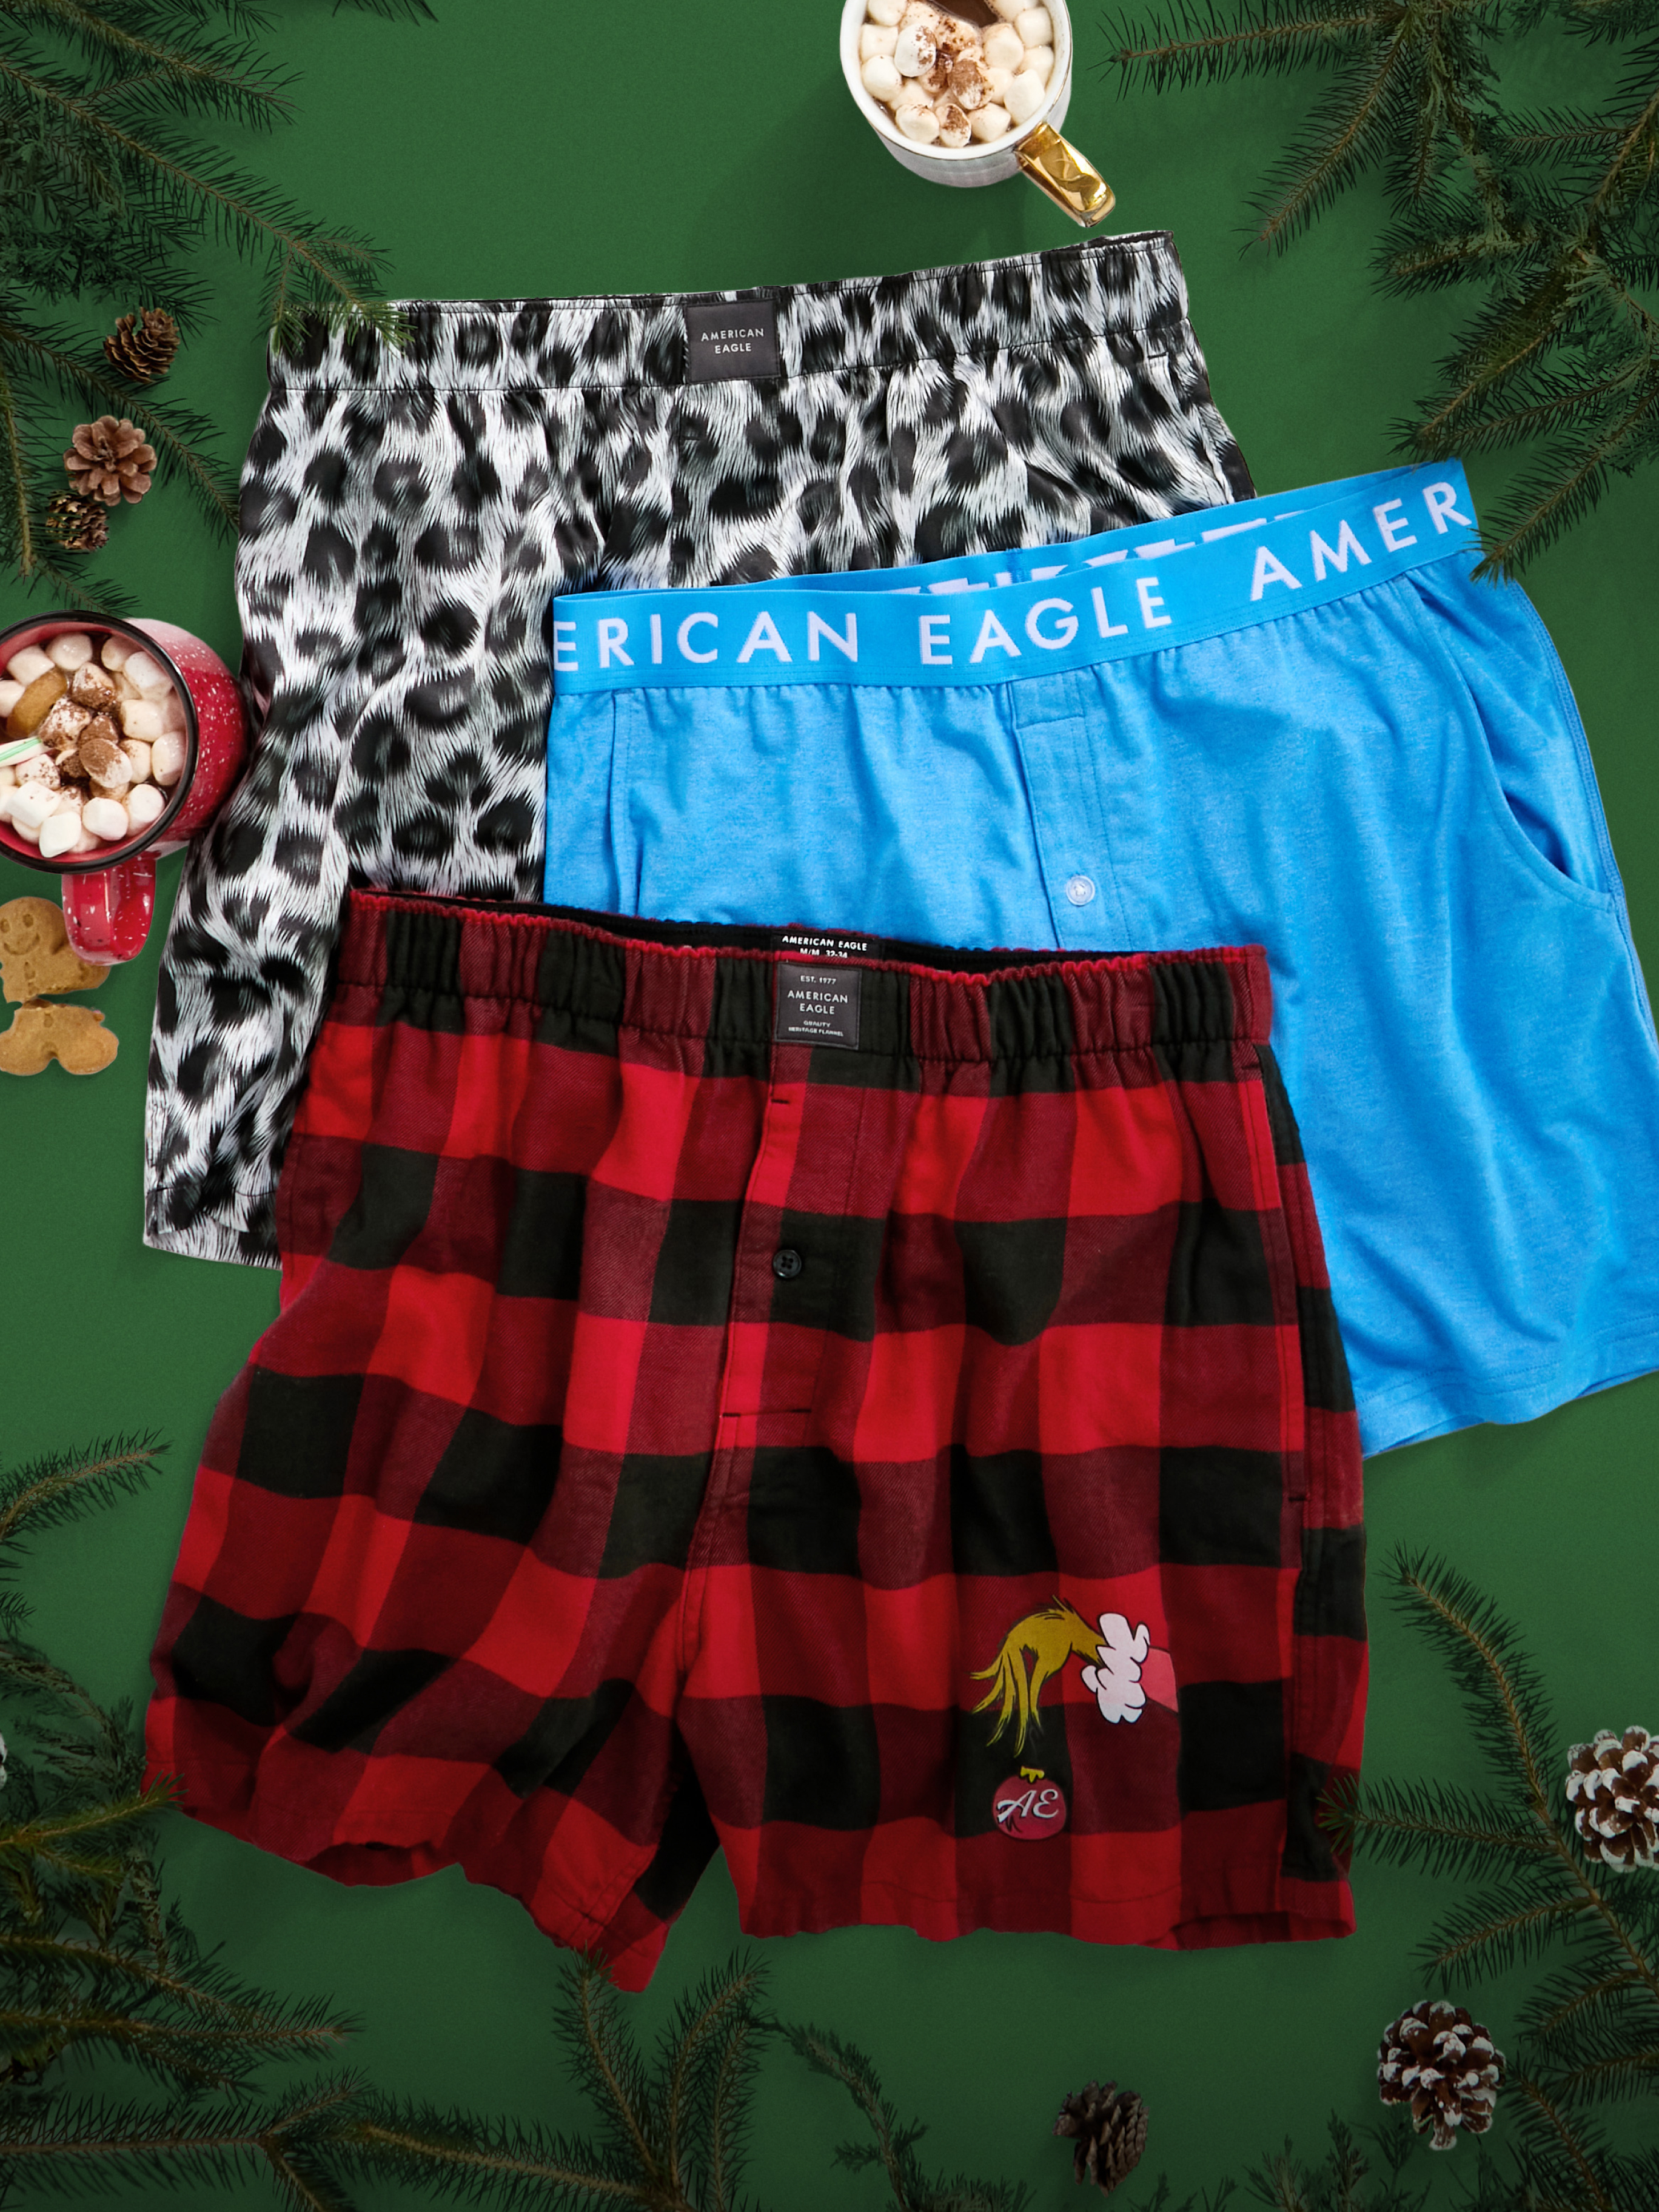 American Eagle Boxers Briefs, This style is perfect for the guy